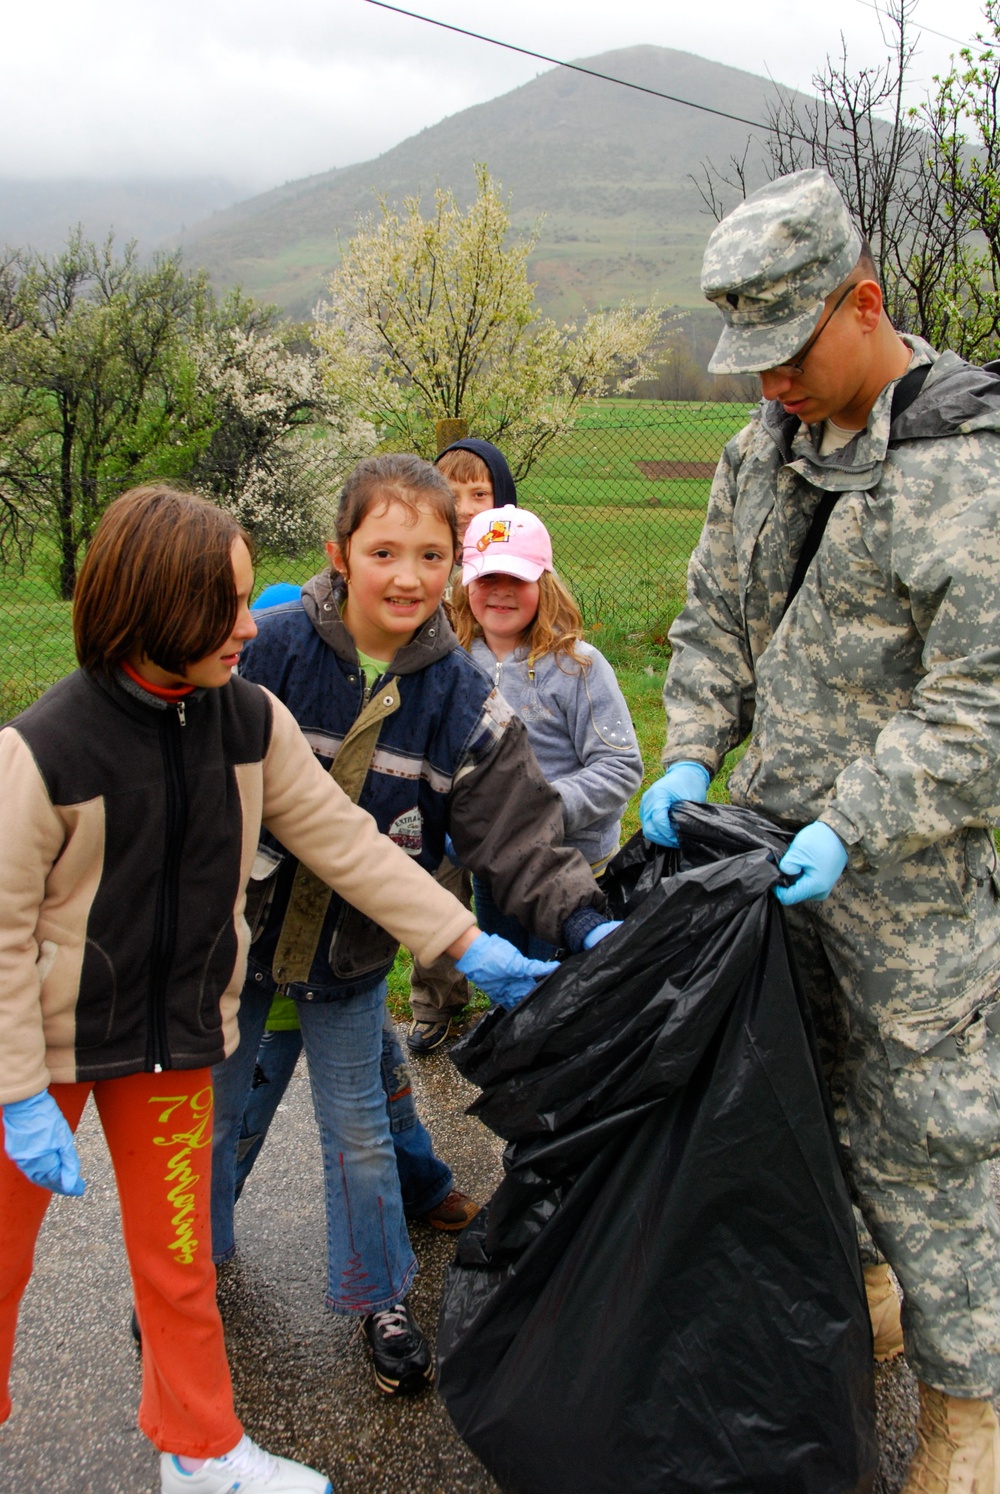 Cleaning up Kosovo one trash bag at a time